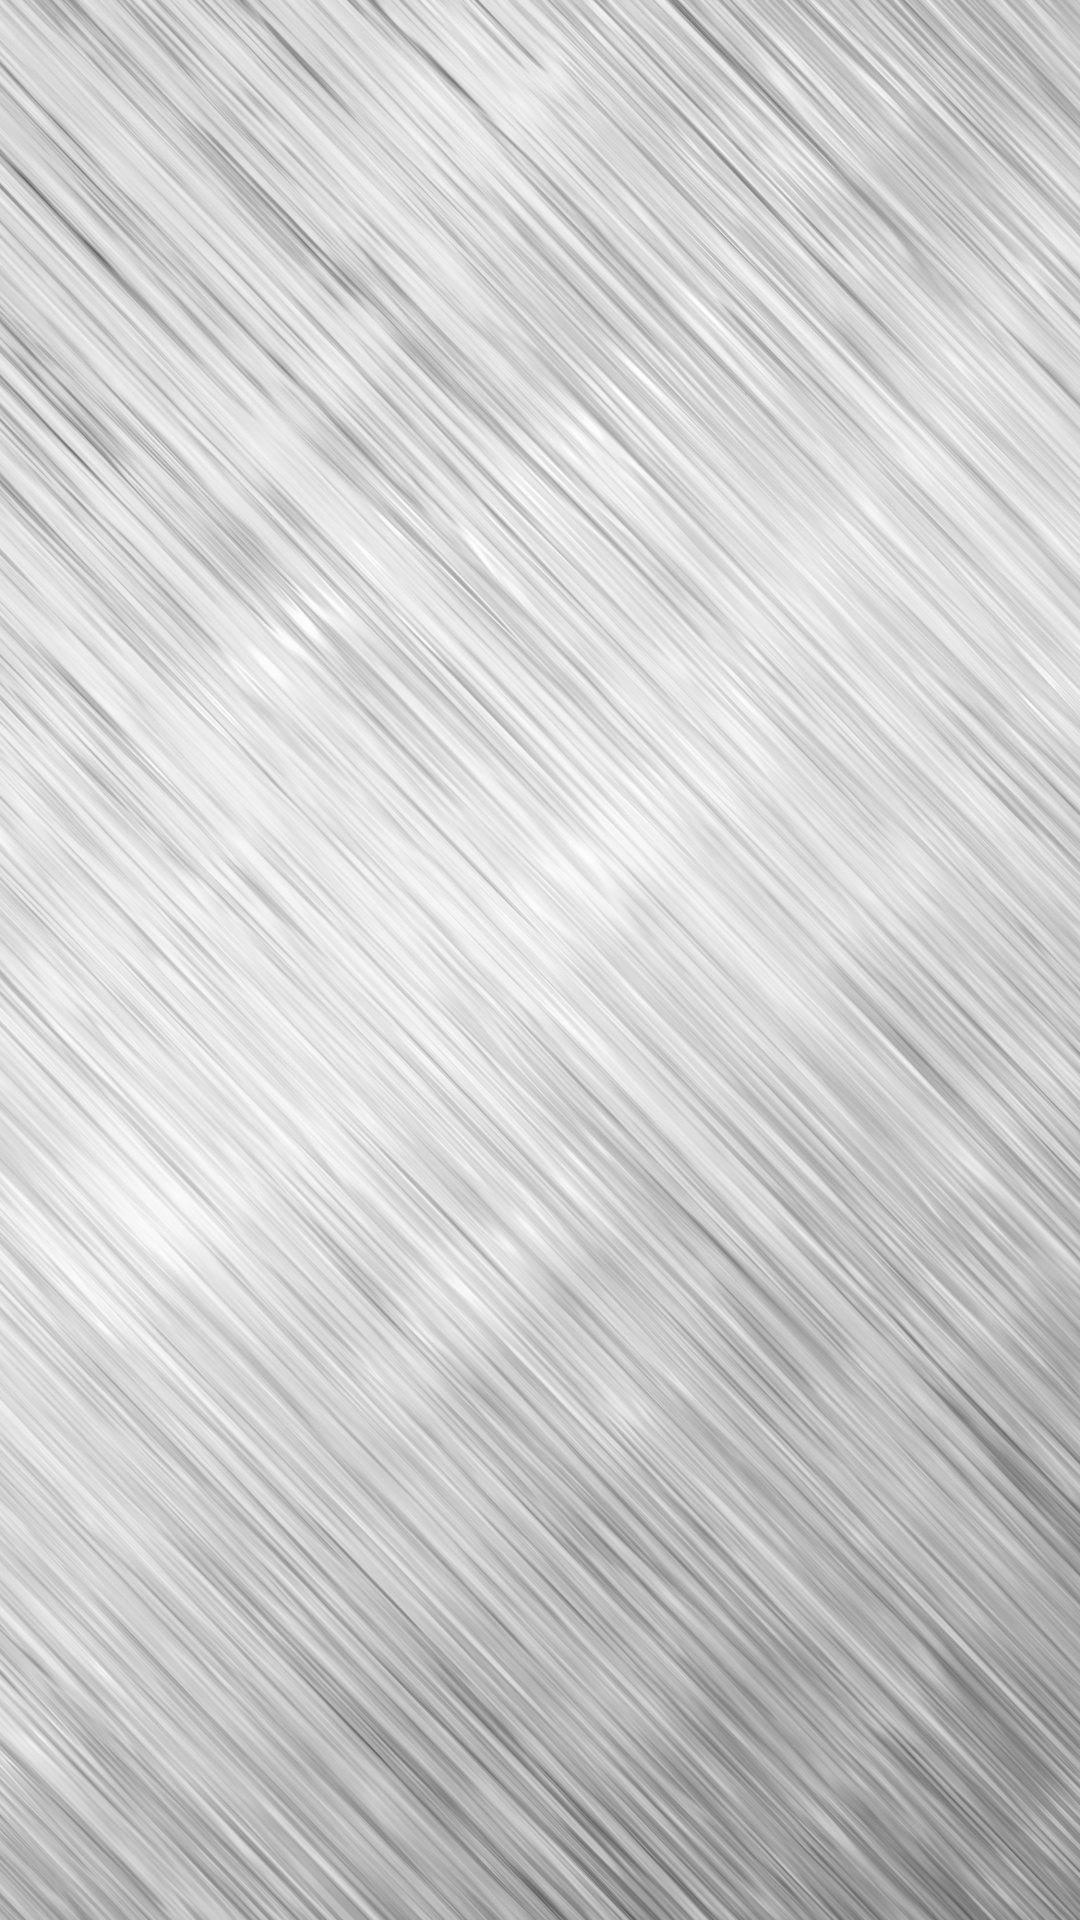 Grey and White Striped Textile. Wallpaper in 1080x1920 Resolution